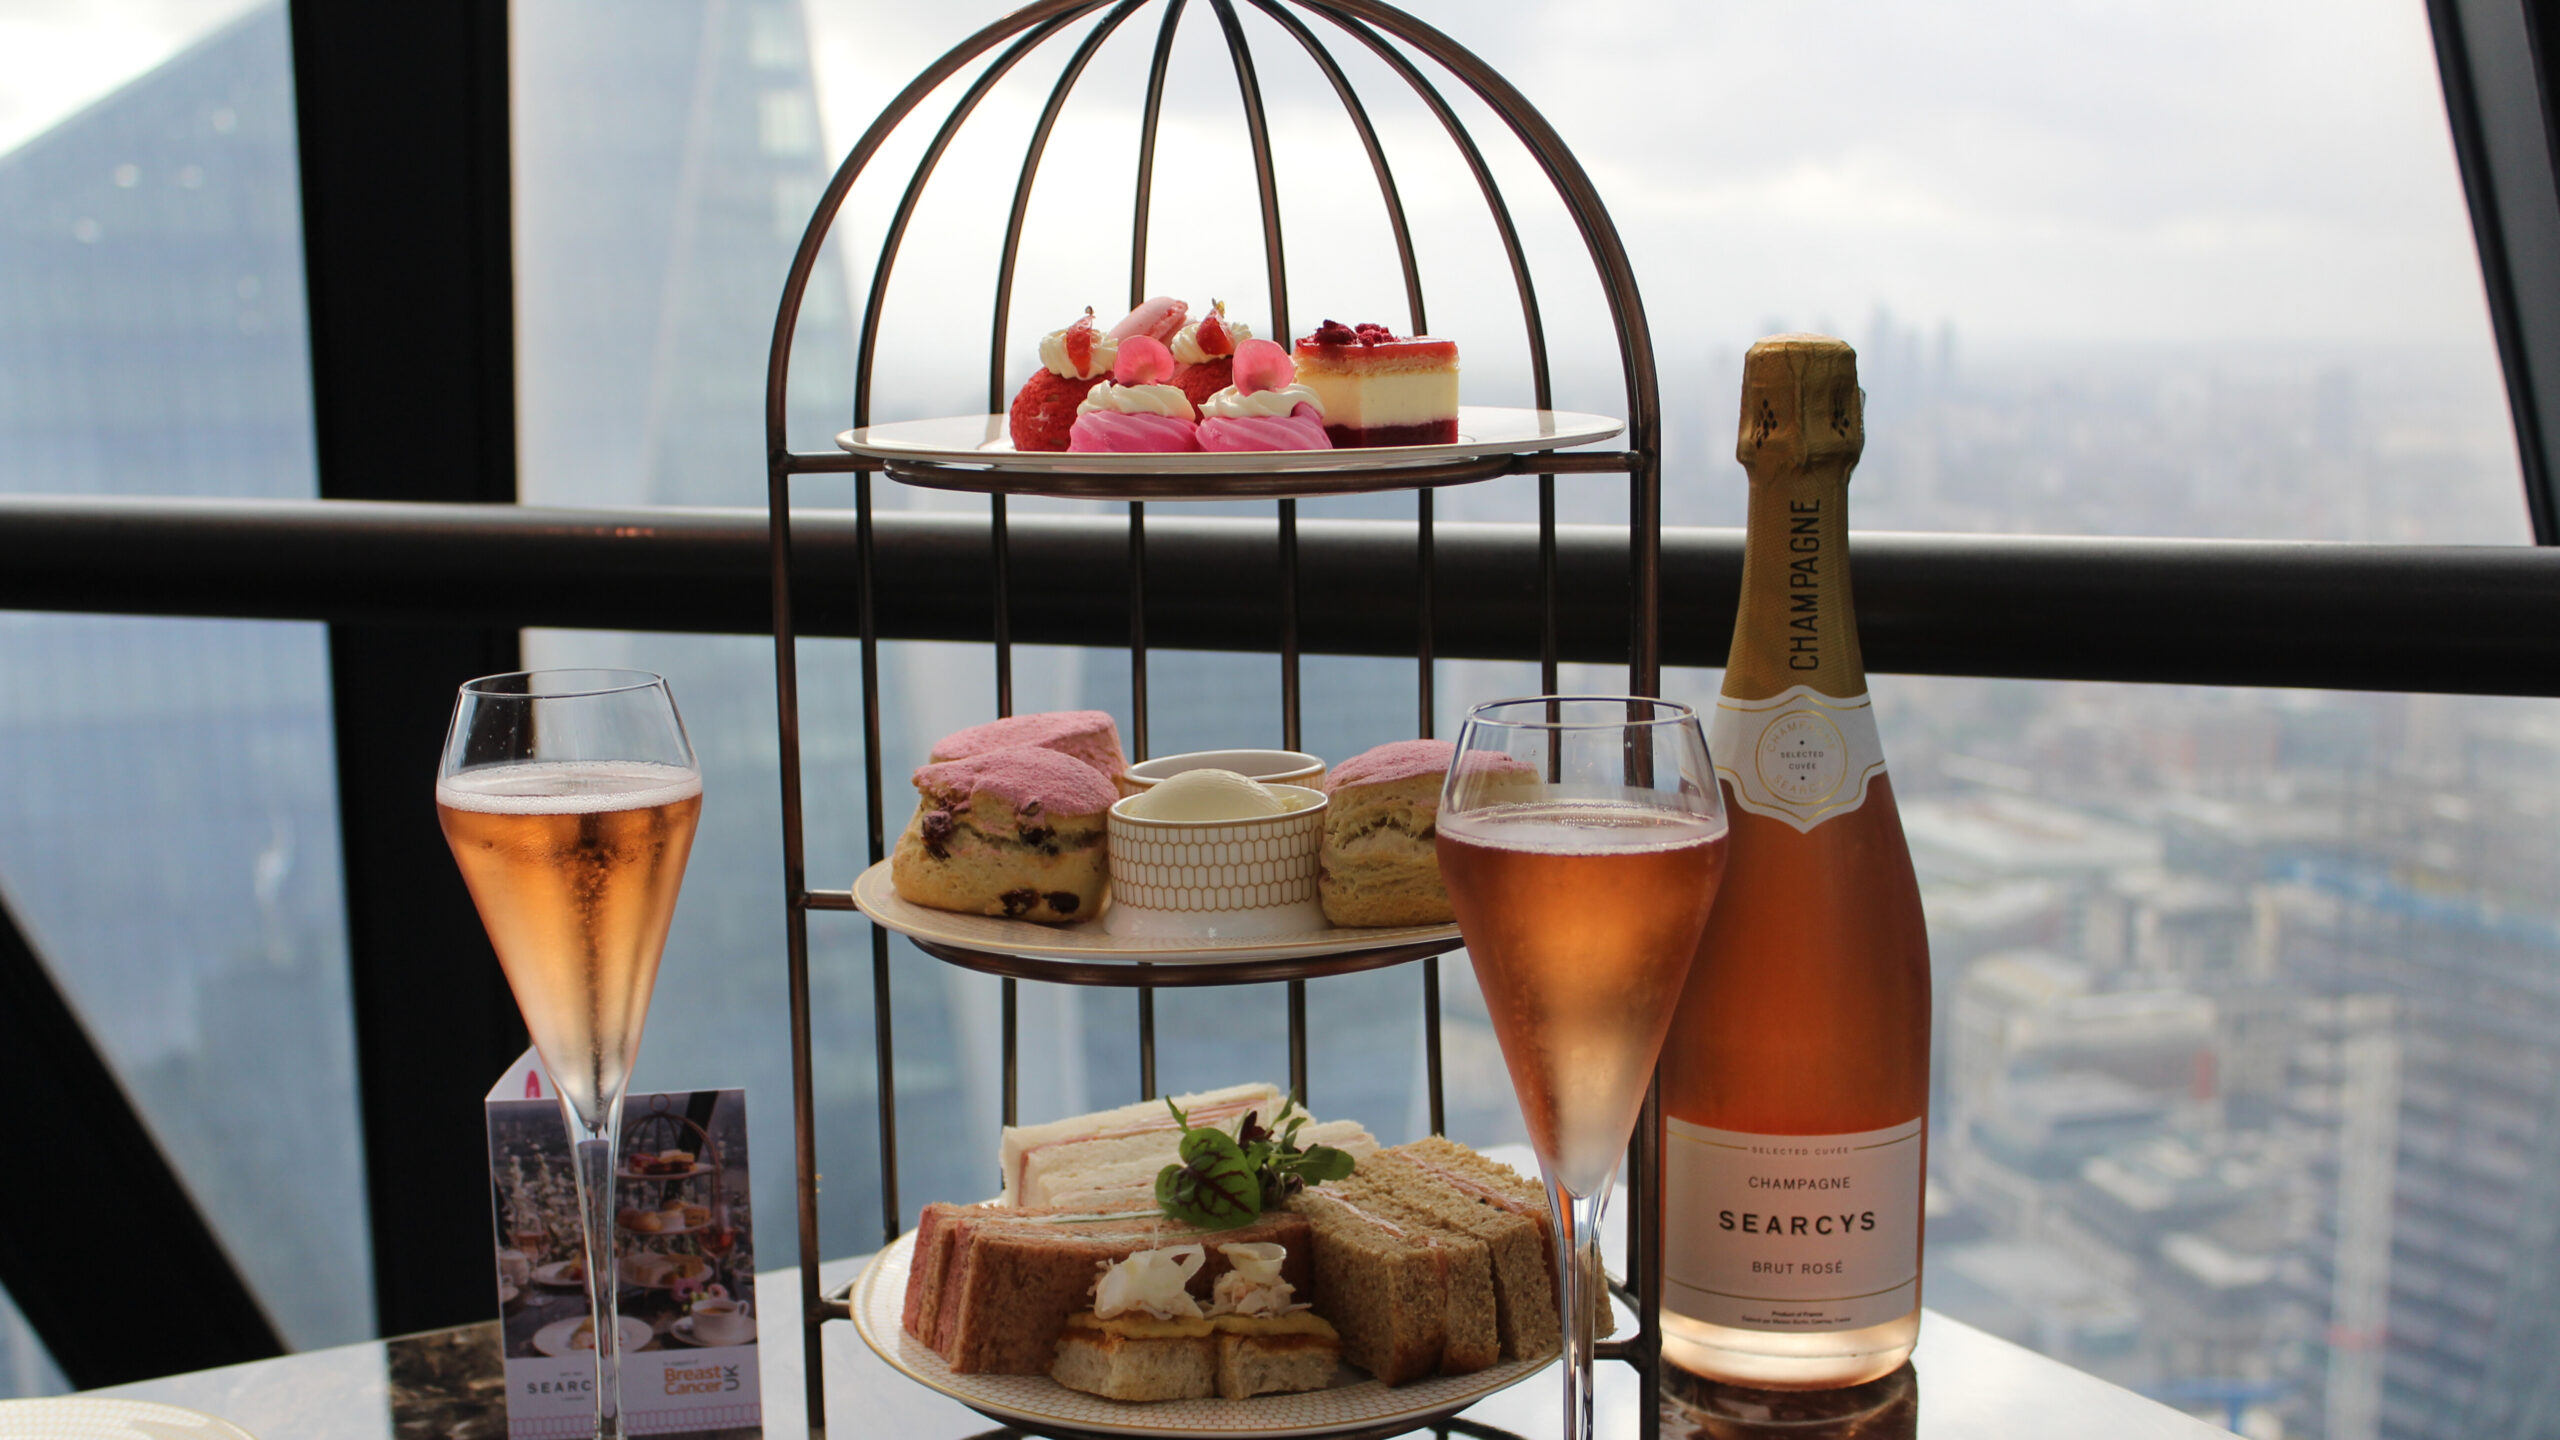 Pink Afternoon Tea - Searcys at the Gherkin